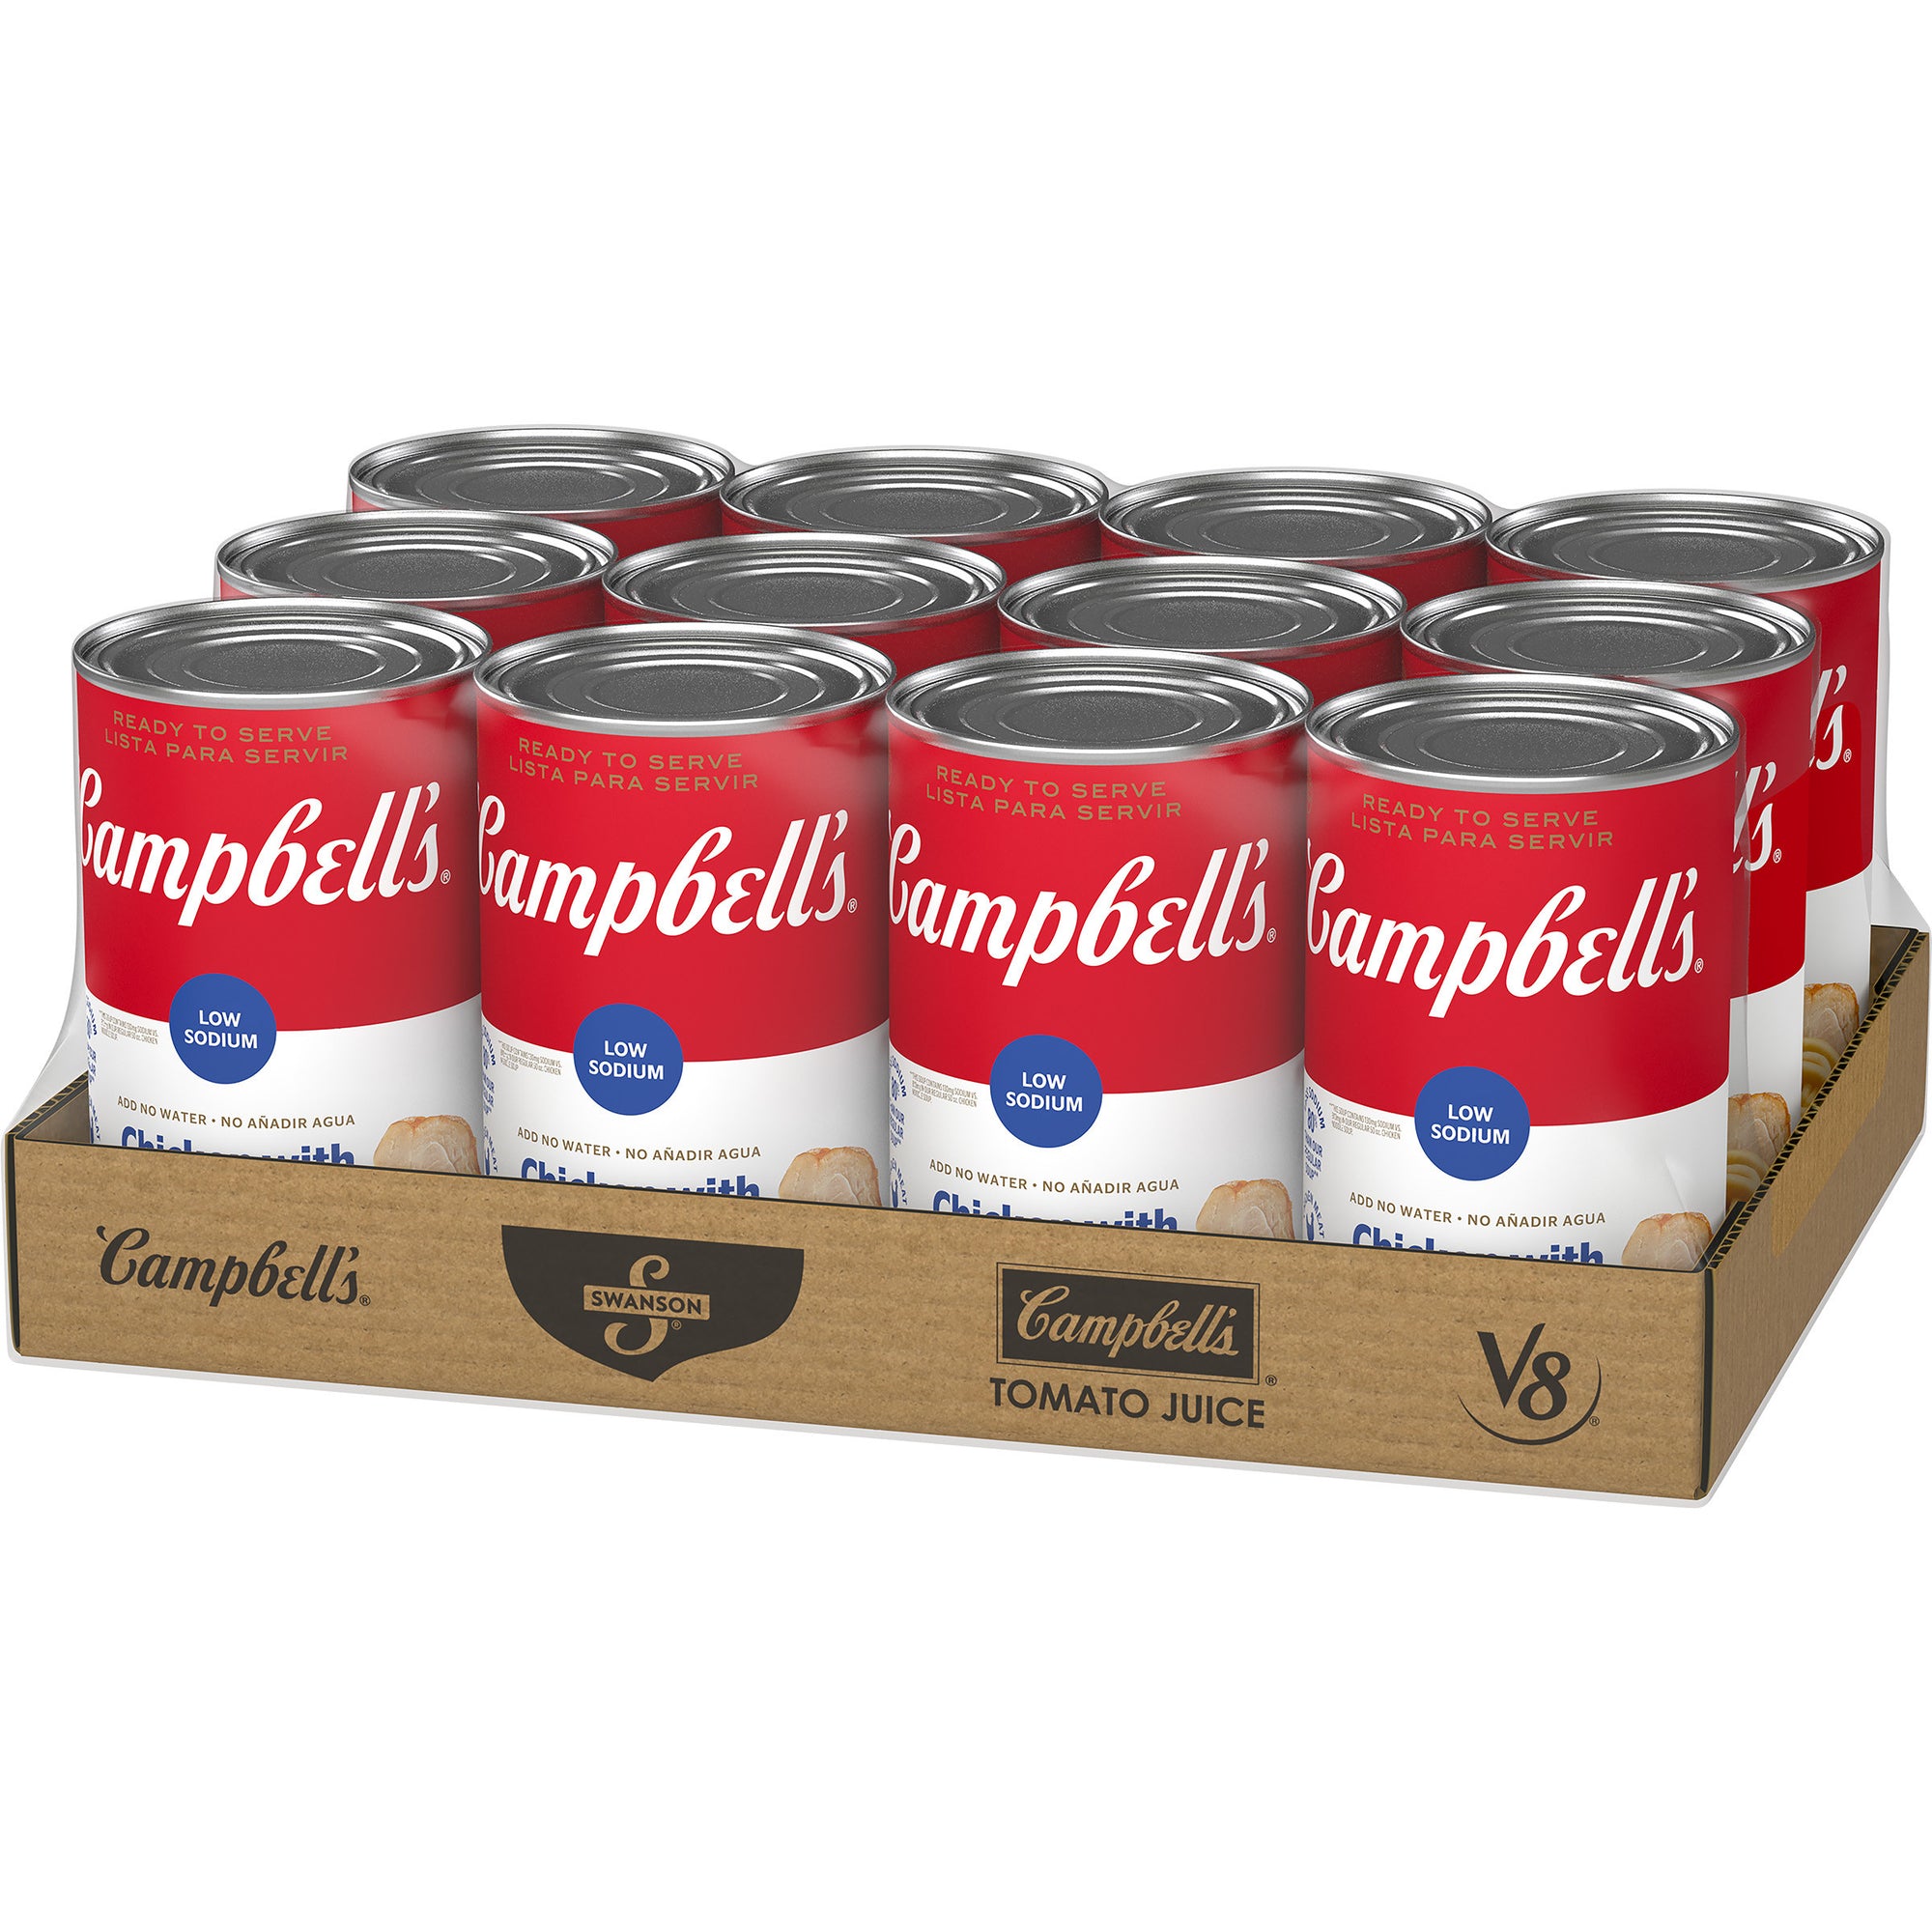 CAMPBELL'S CLASSIC LOW SODIUM CHICKEN NOODLE SHELF STABLE SOUP, 12 - 50 OZ